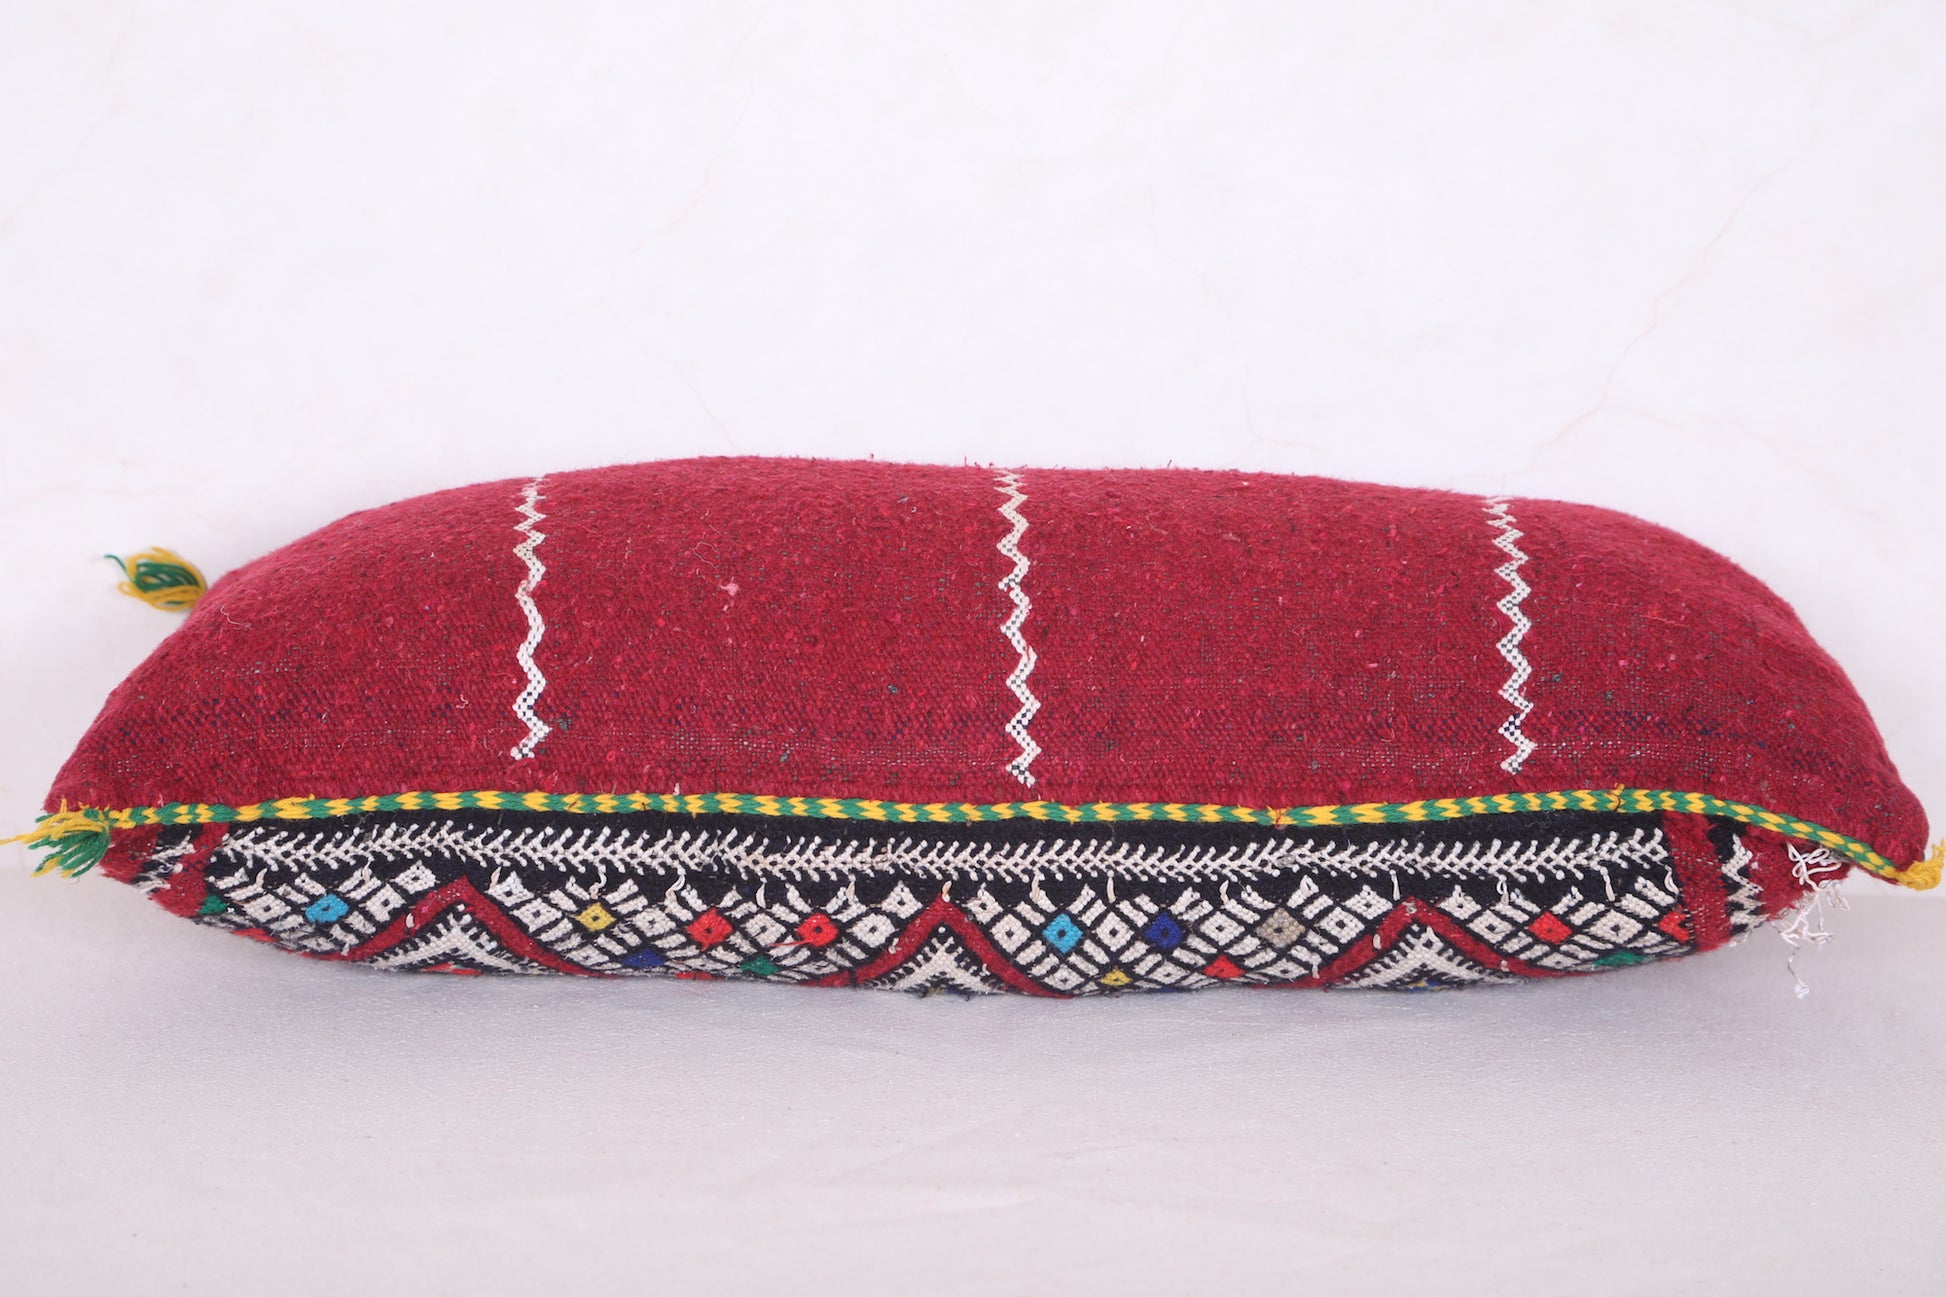 Moroccan kilim Pillow 13.3 INCHES X 25.9 INCHES